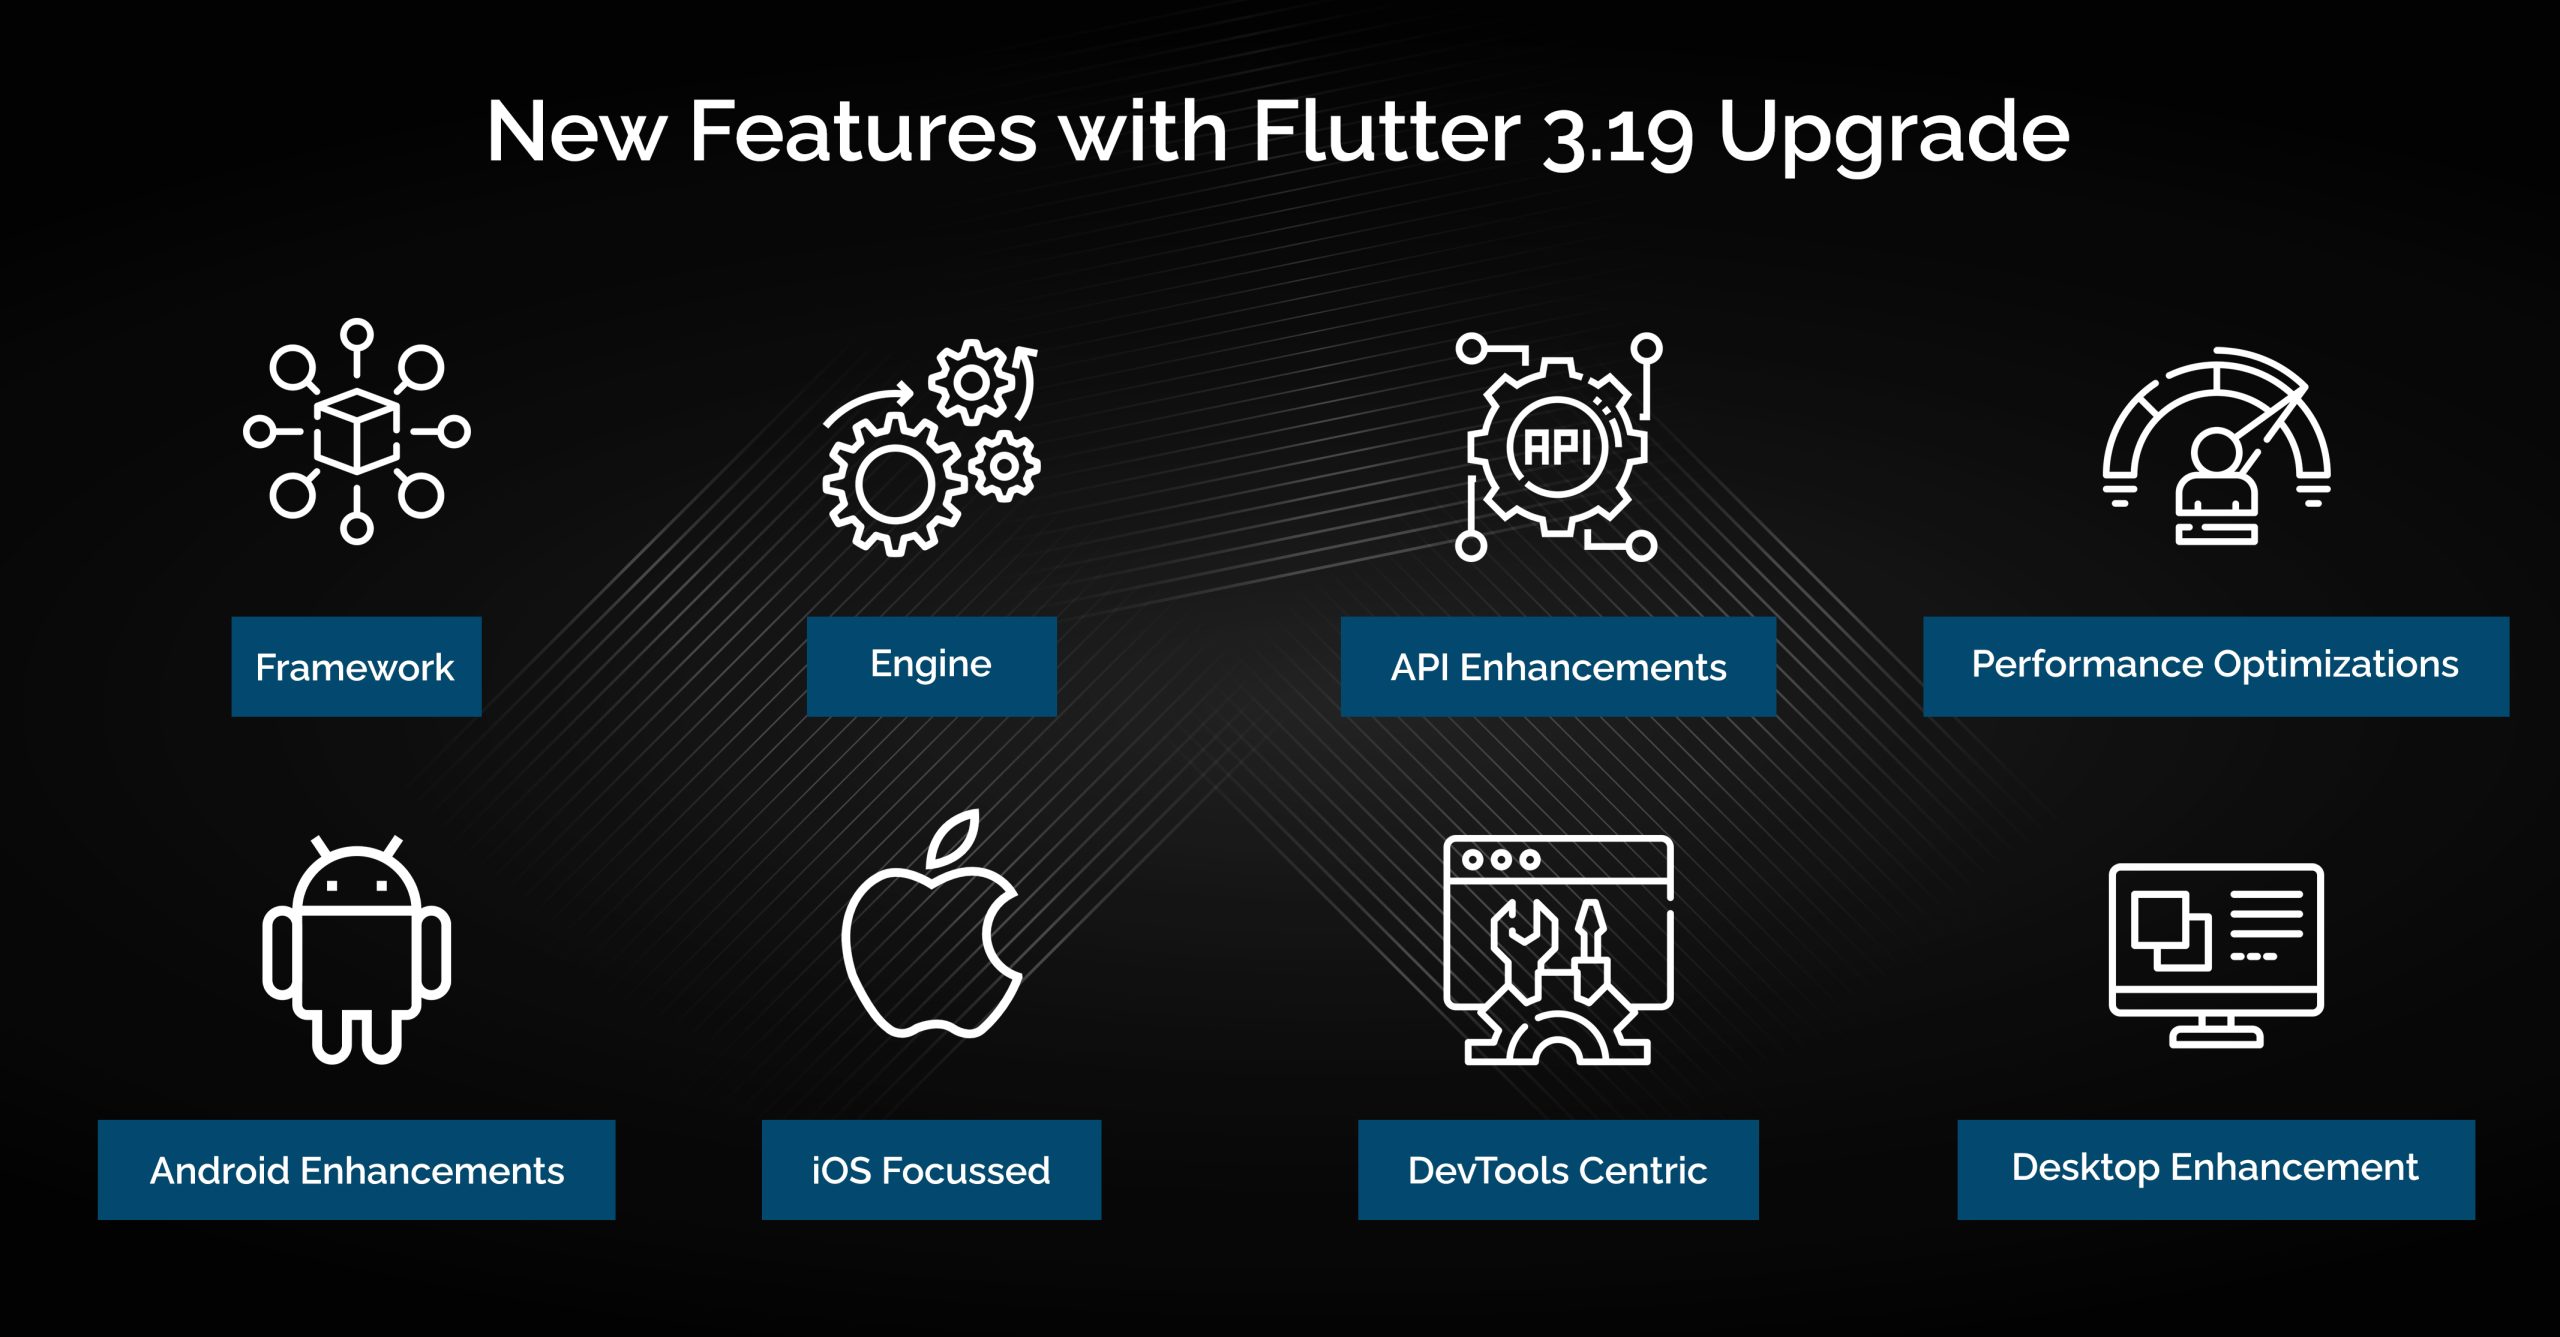 New Features with Flutter 3.19 Upgrade